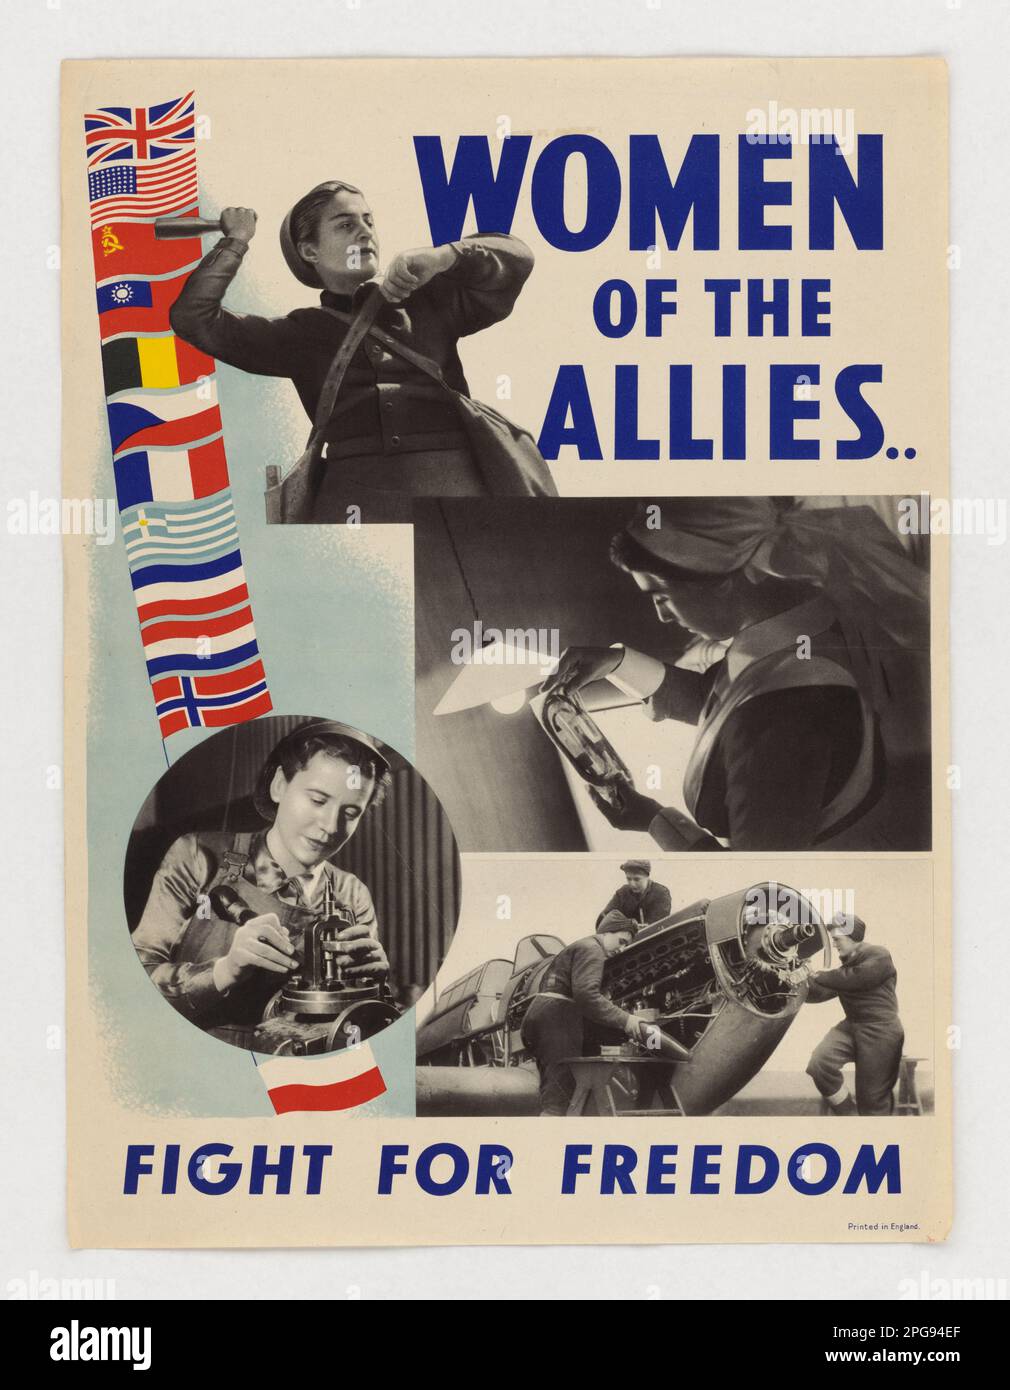 Women of the Allies…. Country: England. 1942 - 1945.  Office for Emergency Management. Office of War Information. Domestic Operations Branch. Bureau of Special Services. 3/9/1943-9/15/1945. World War II Foreign Posters Stock Photo